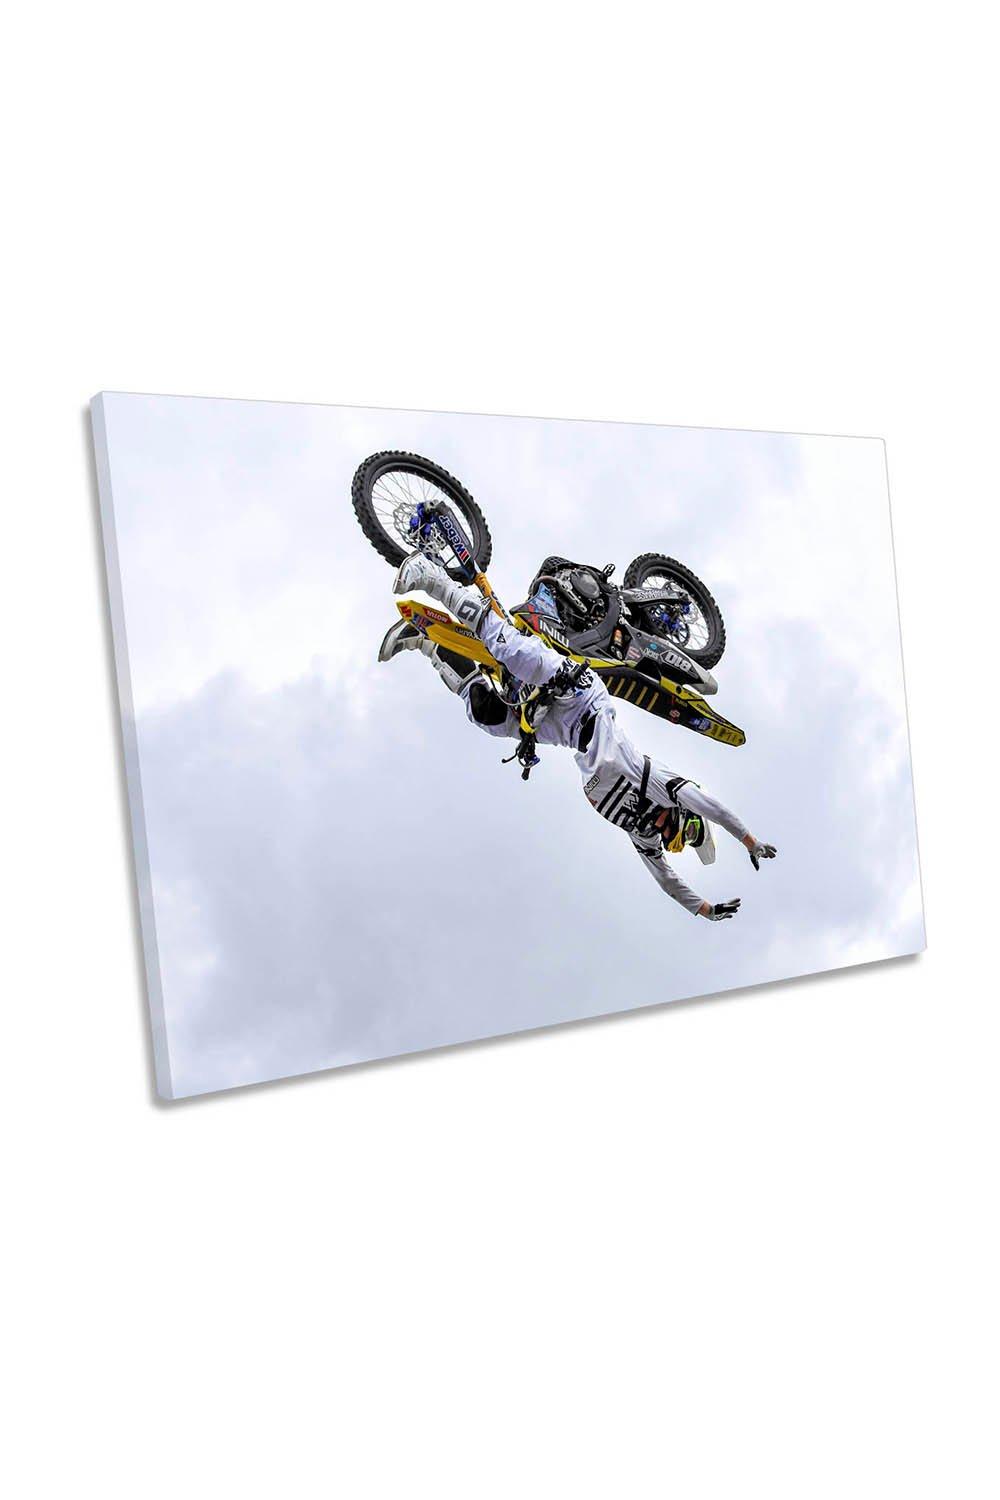 Freestyle Motocross Sports Motor Bike Canvas Wall Art Picture Print